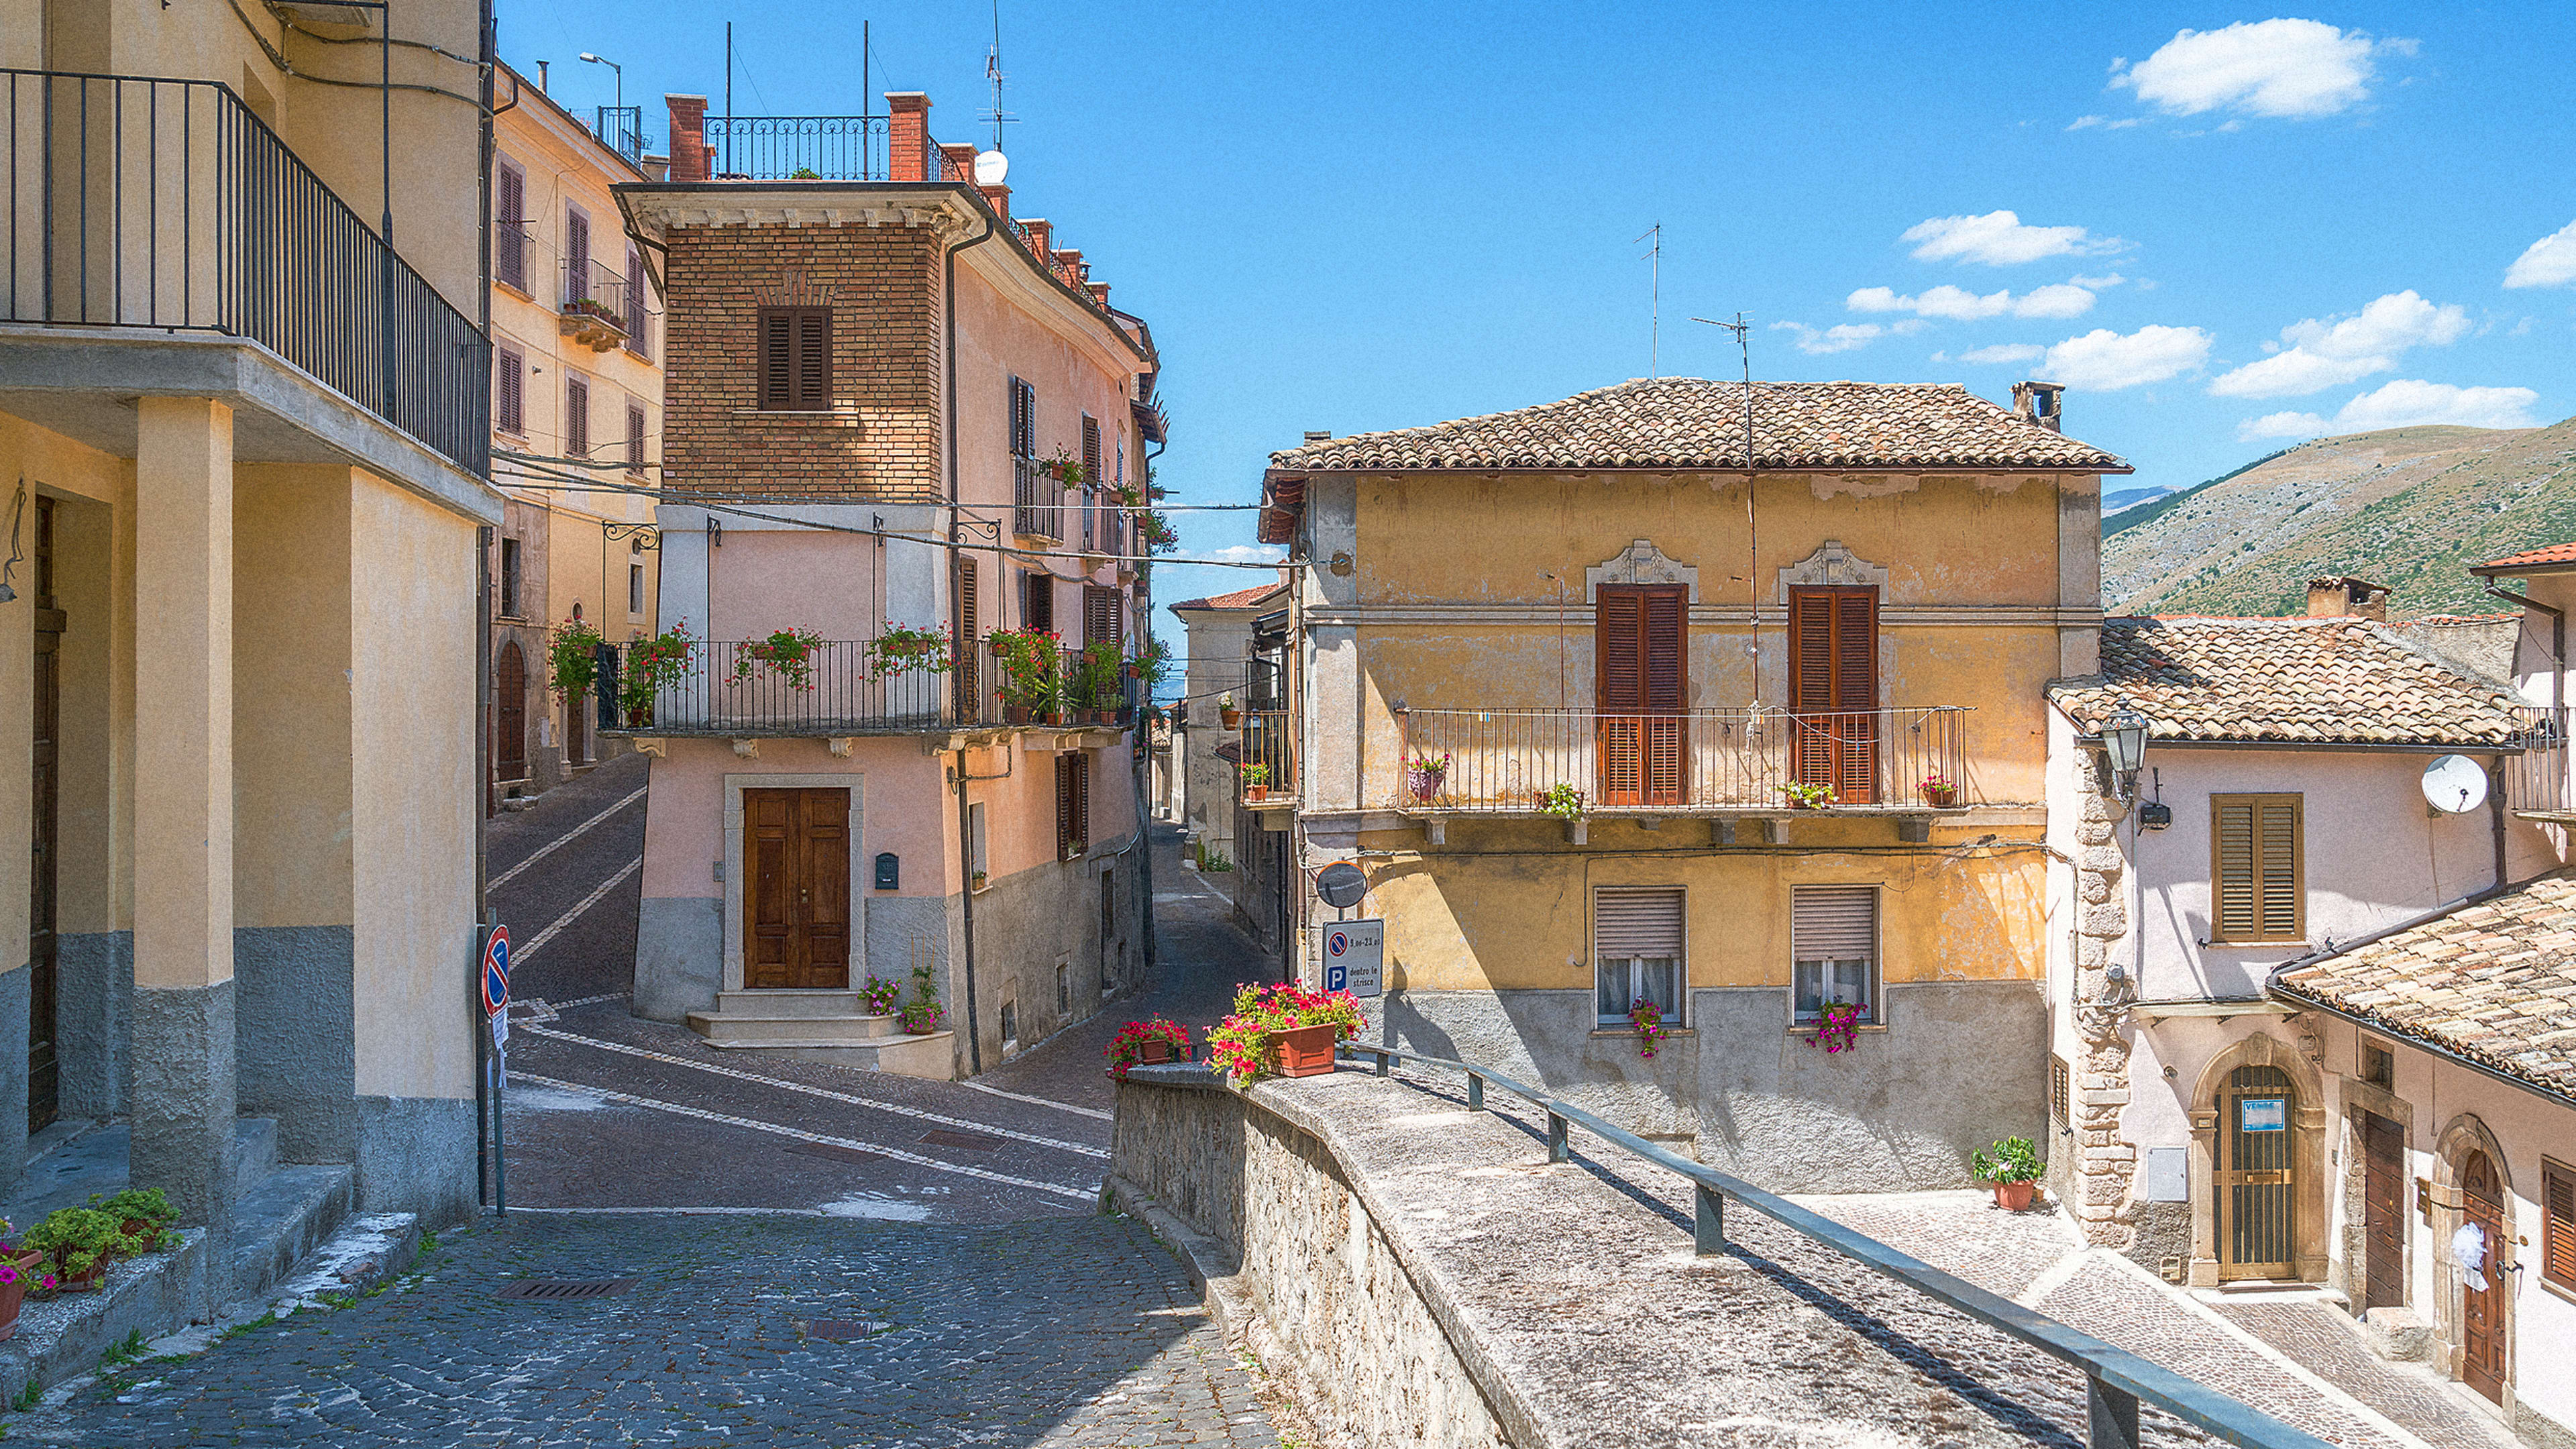 How MIT students are helping revitalize a tiny Italian village